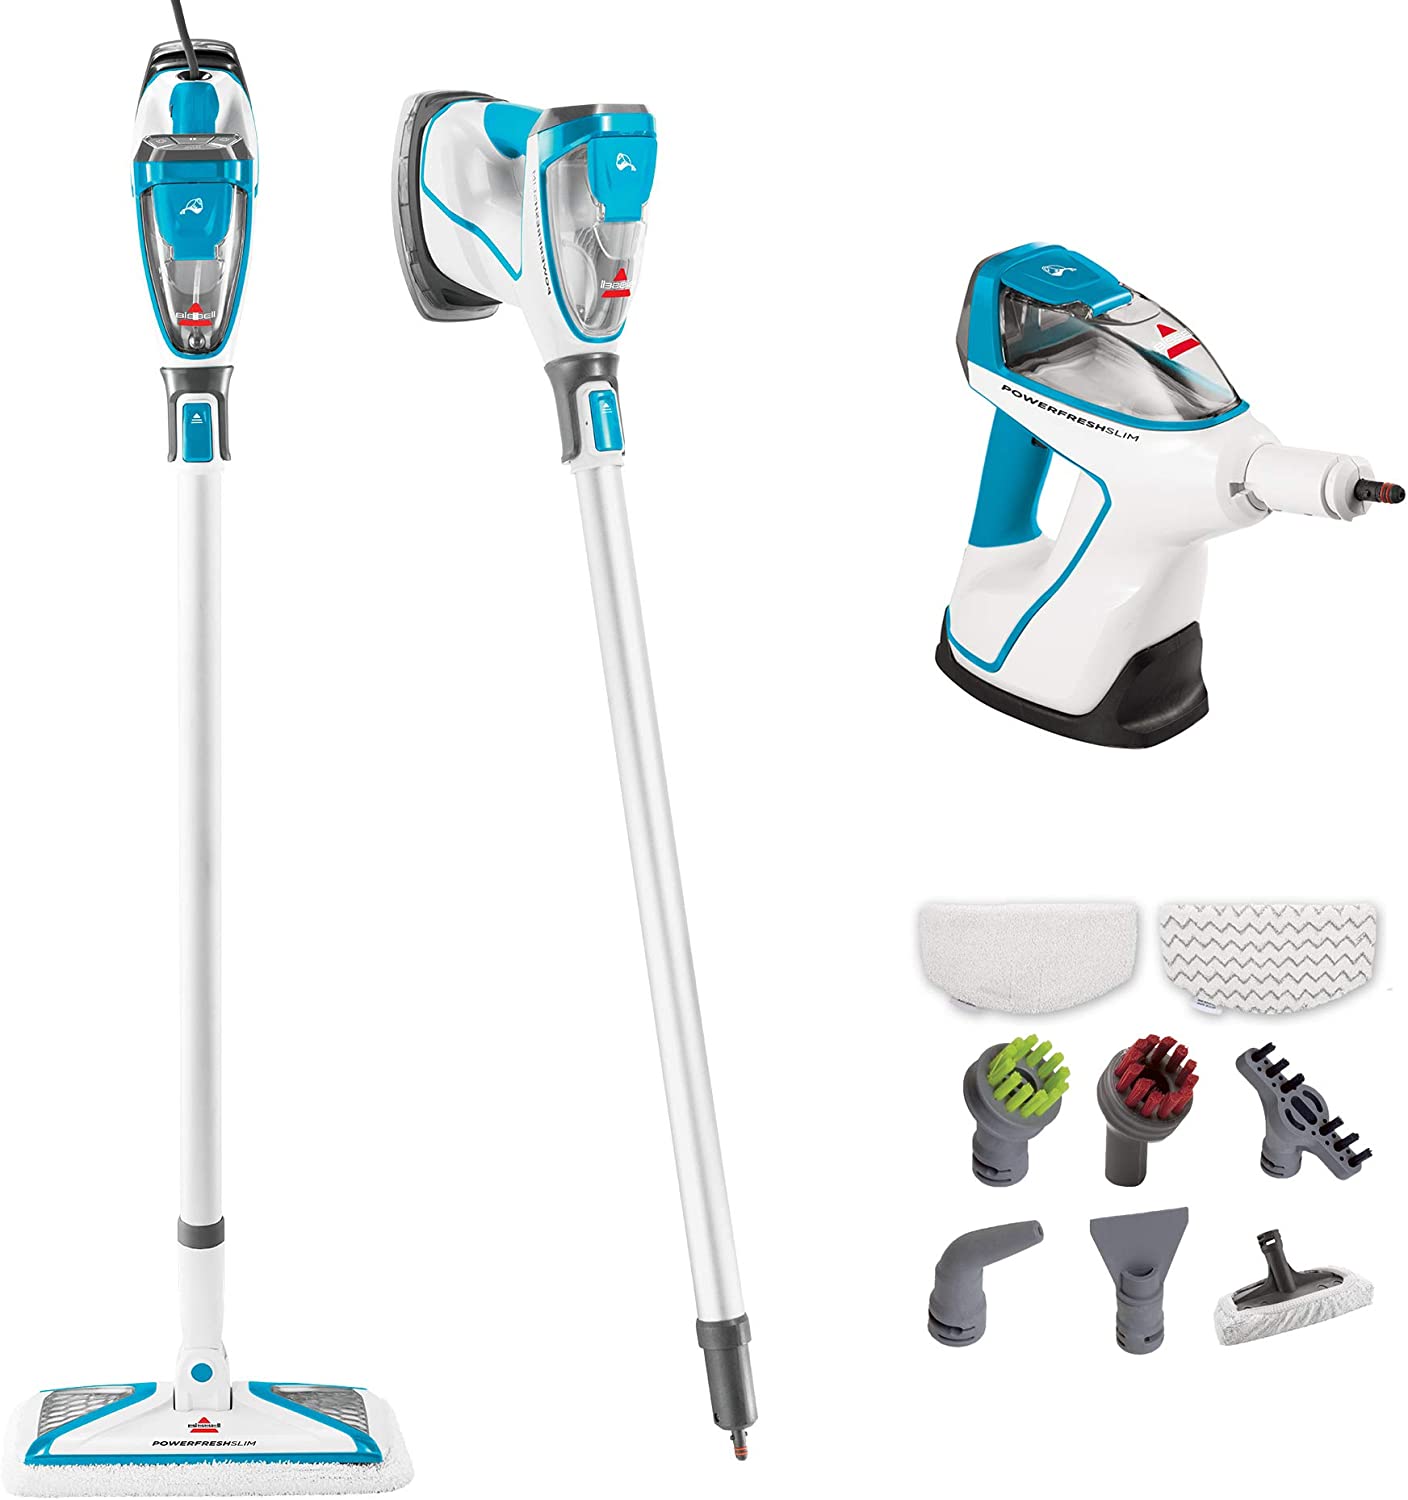 BISSELL 2075A Power Fresh Slim Hard Wood Floor Steam Cleaner System, Steam Mop, Handheld Steamer, Scrubbing Tools and Clothing Steamer Tool - image 1 of 9